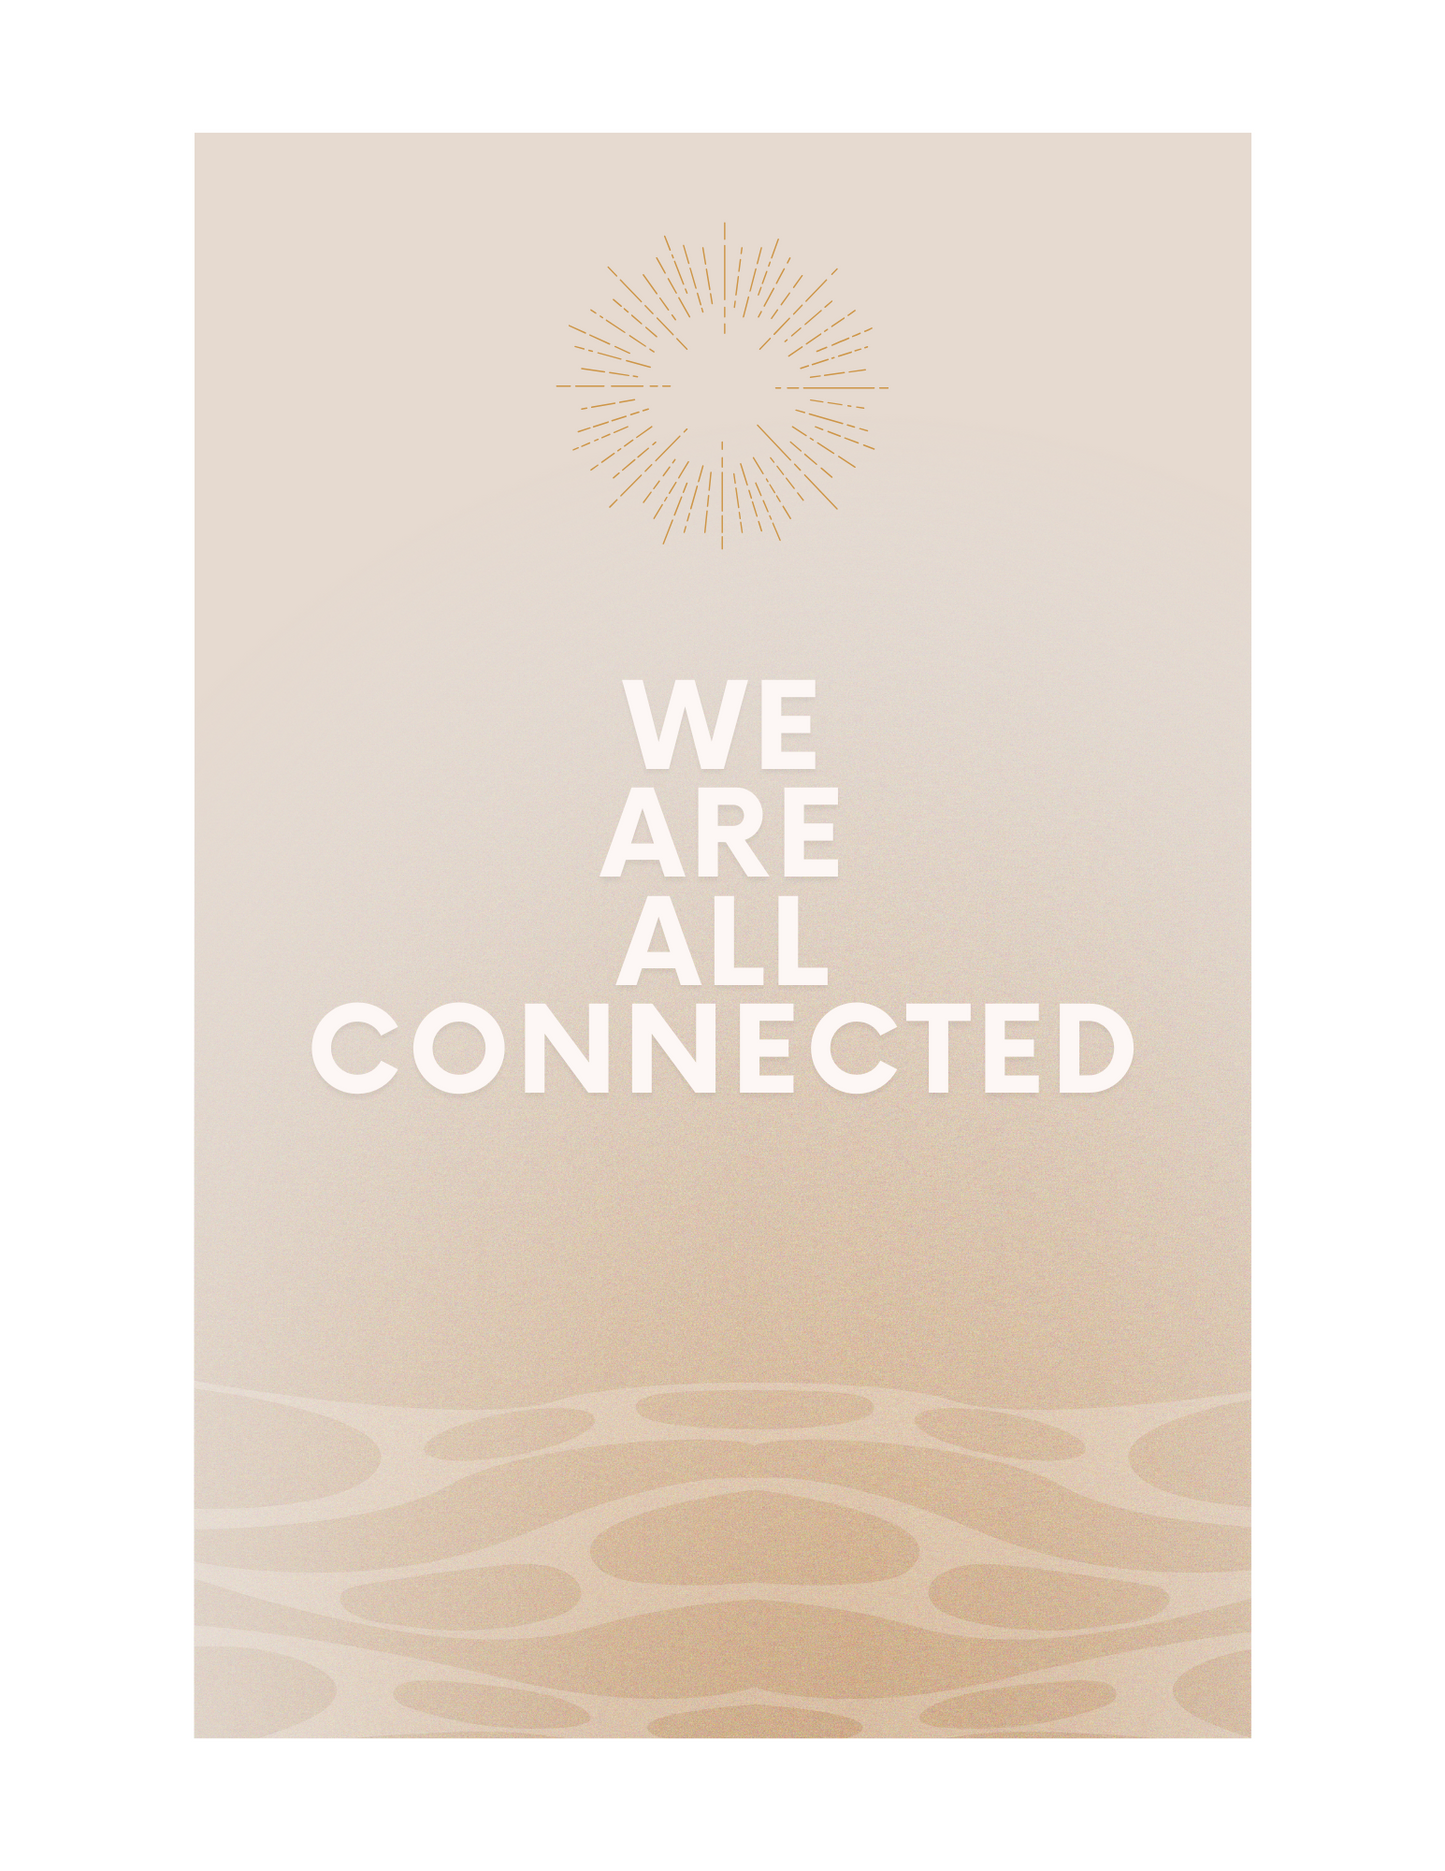 We Are All Connected art print